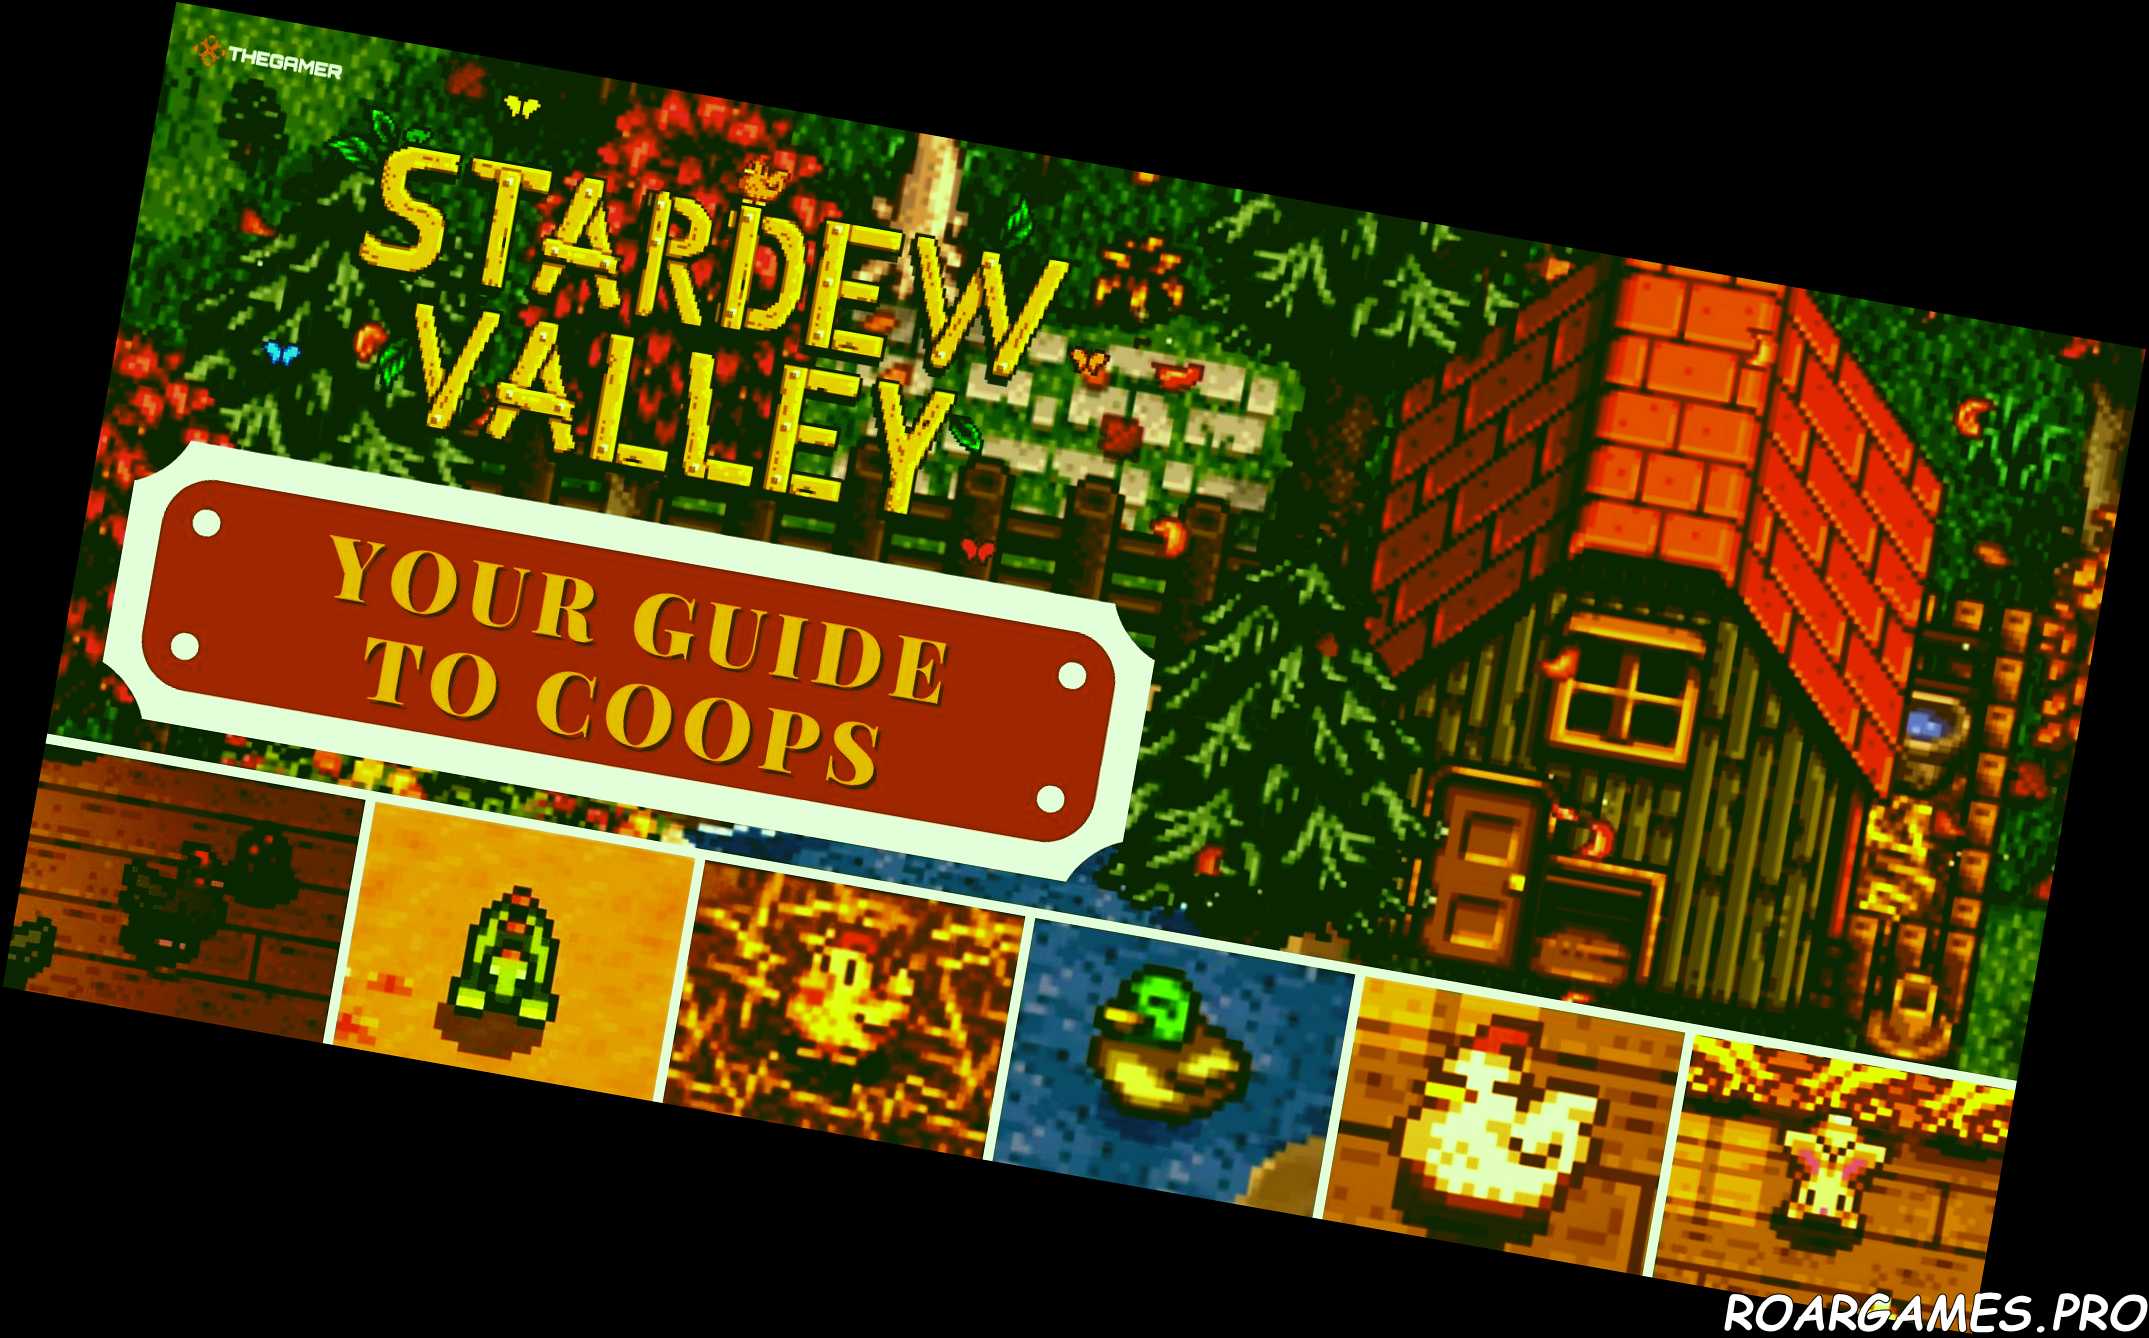 Stardew Valley Coops Title Image pictures of a coop stardew valley logo and all coop animals